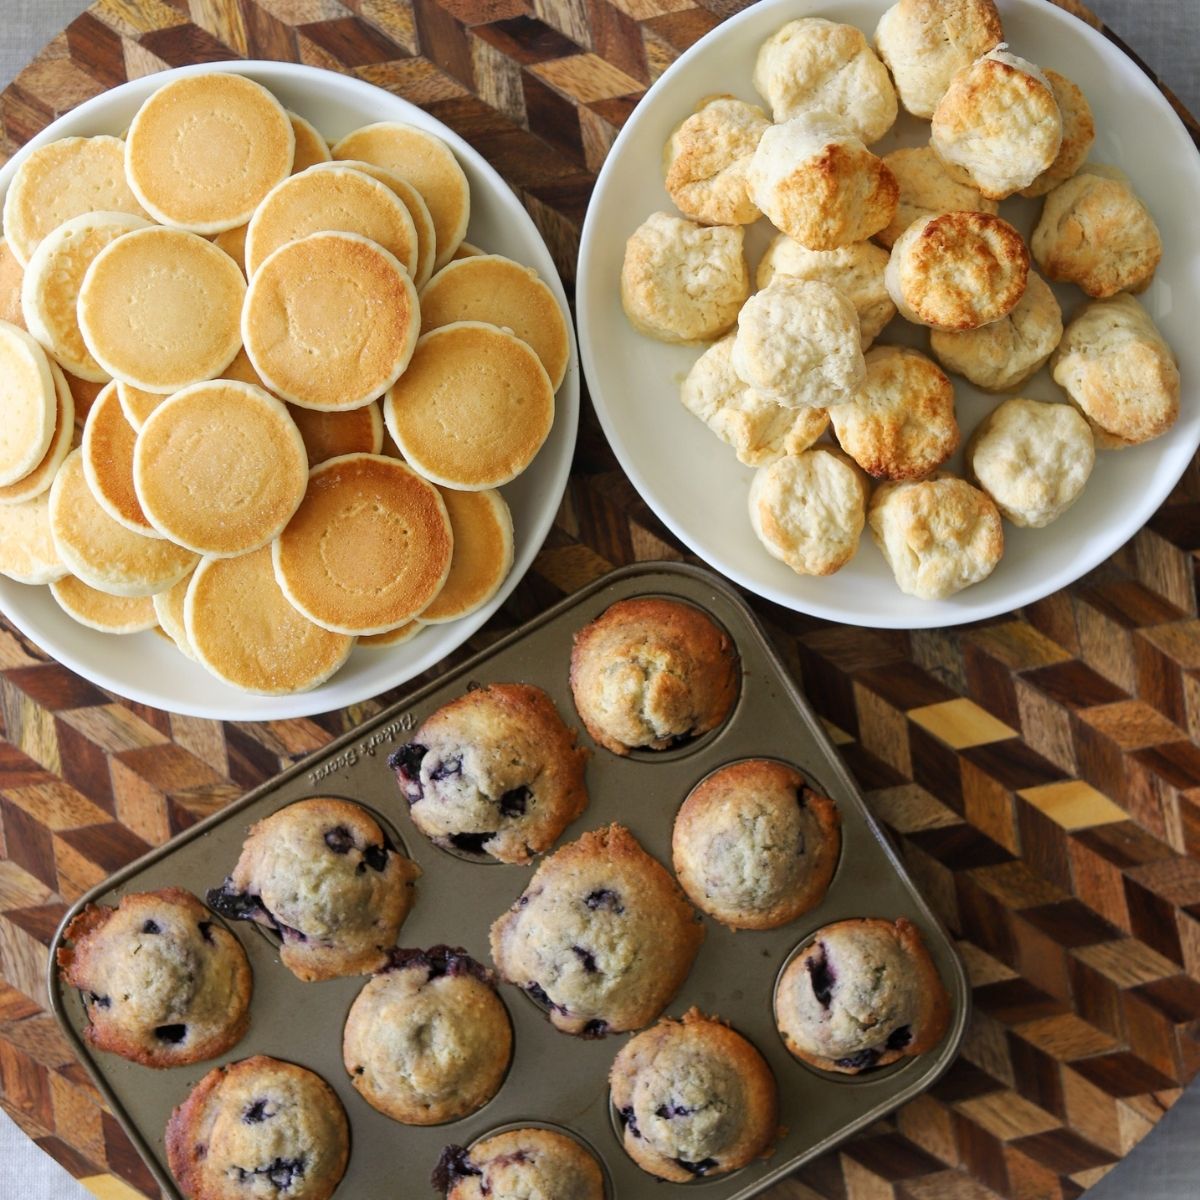 plates full of miniature pancakes, muffins, and biscuits